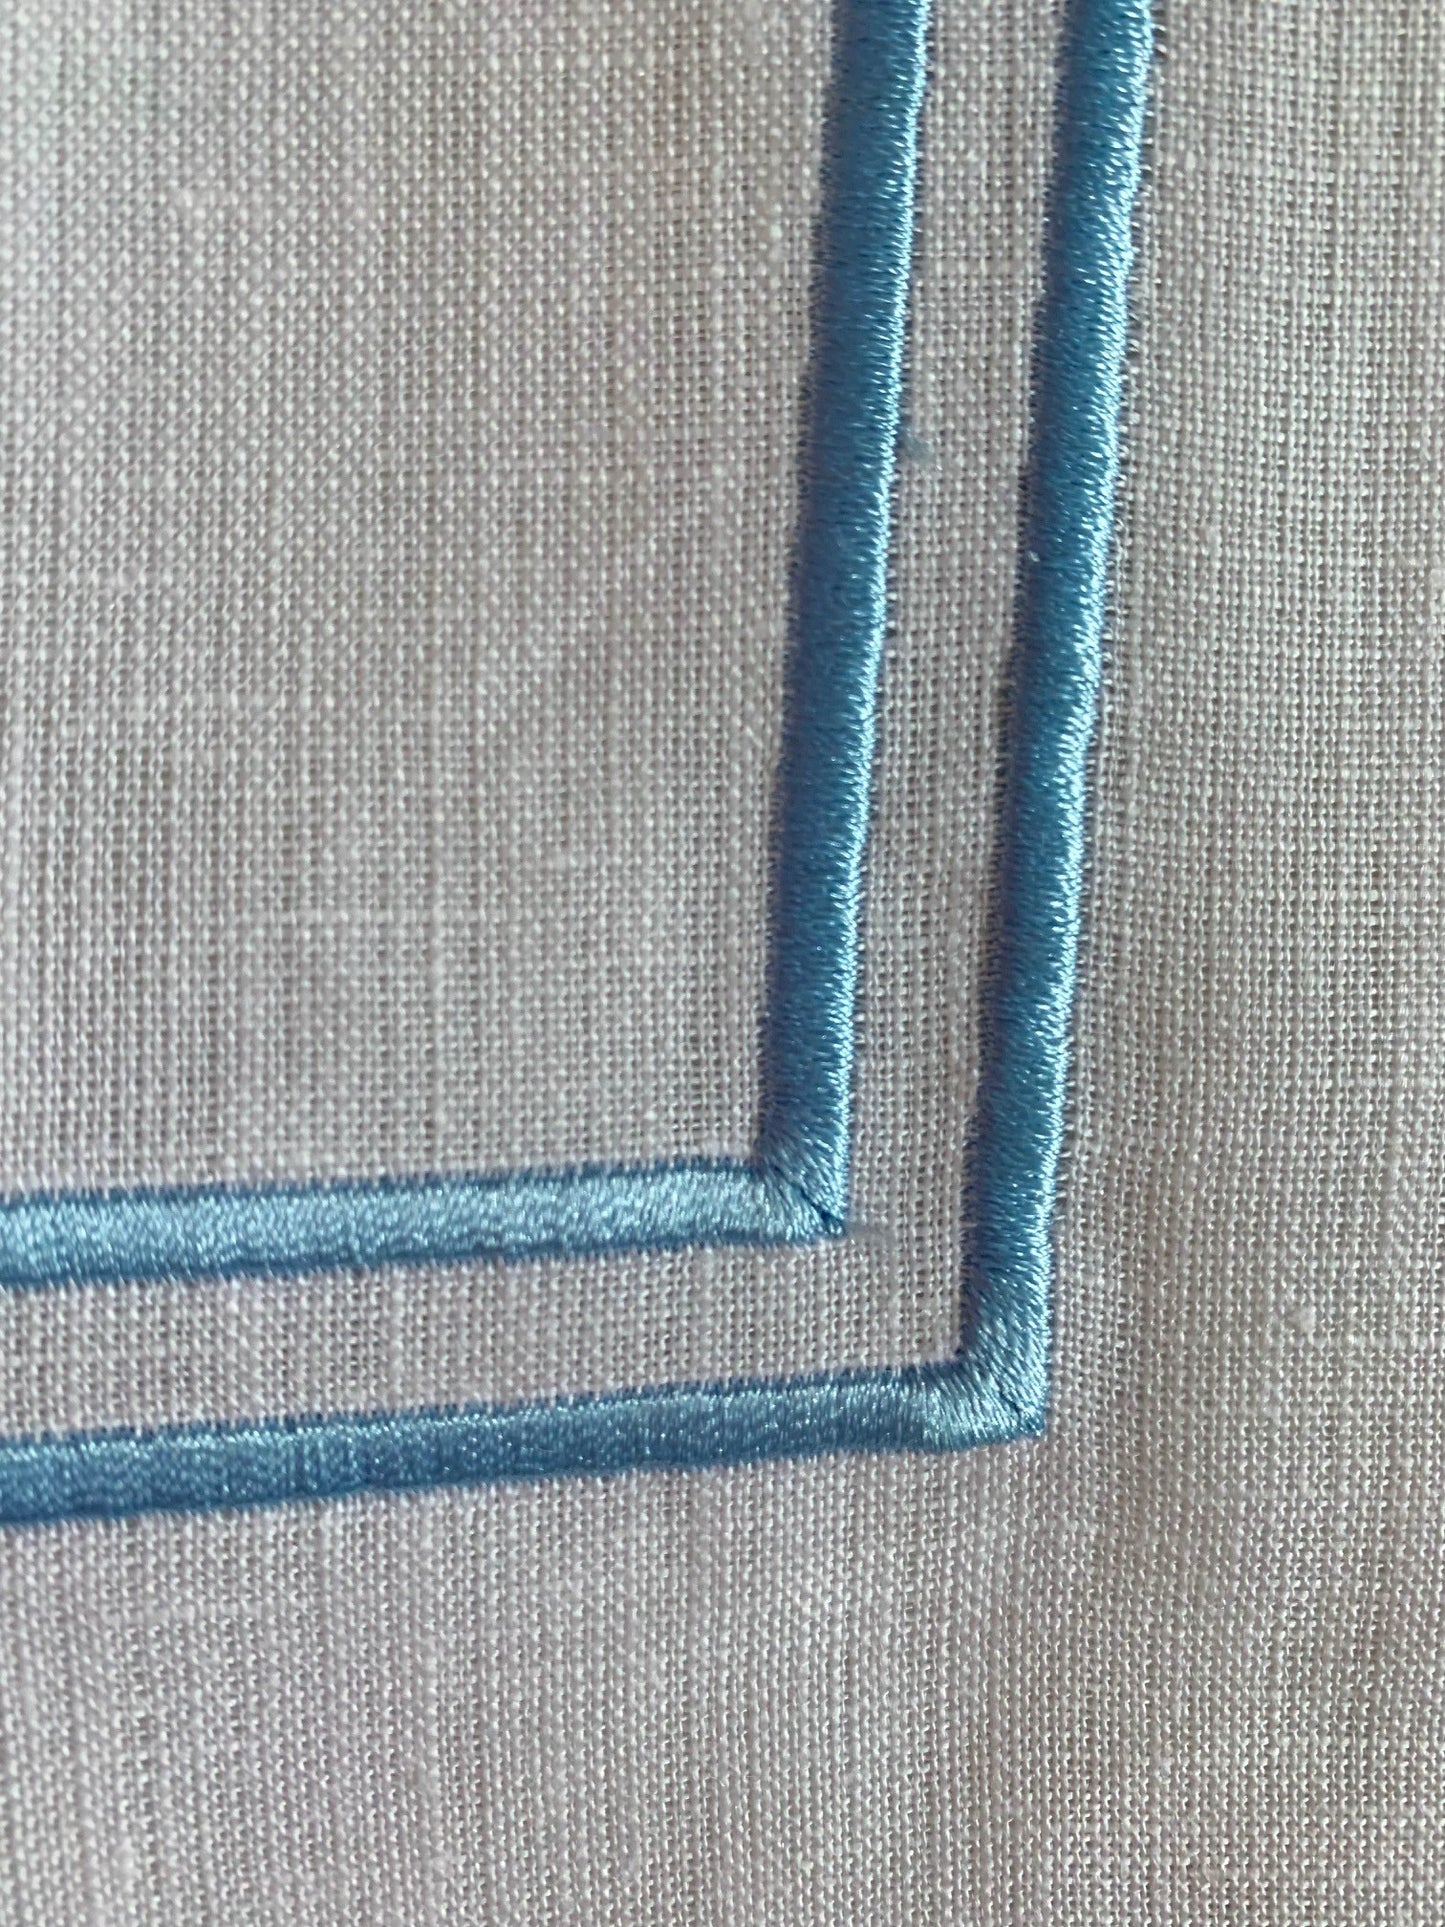 sky blue double piping on a white linen napkin